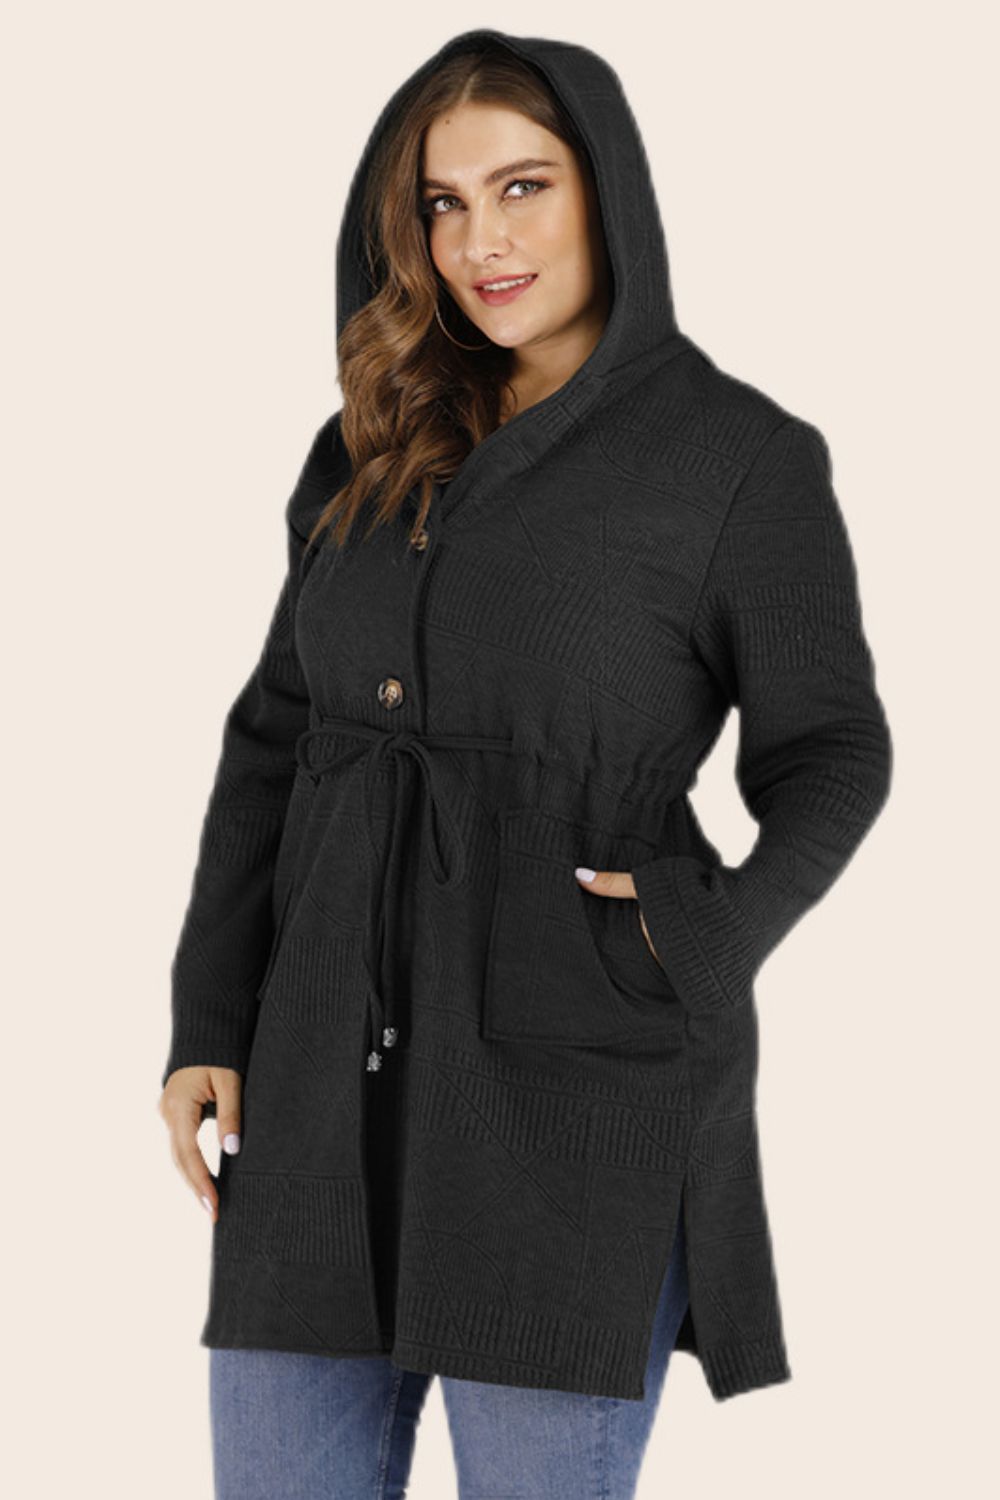 Plus Size Drawstring Waist Hooded Cardigan with Pockets COCO CRESS